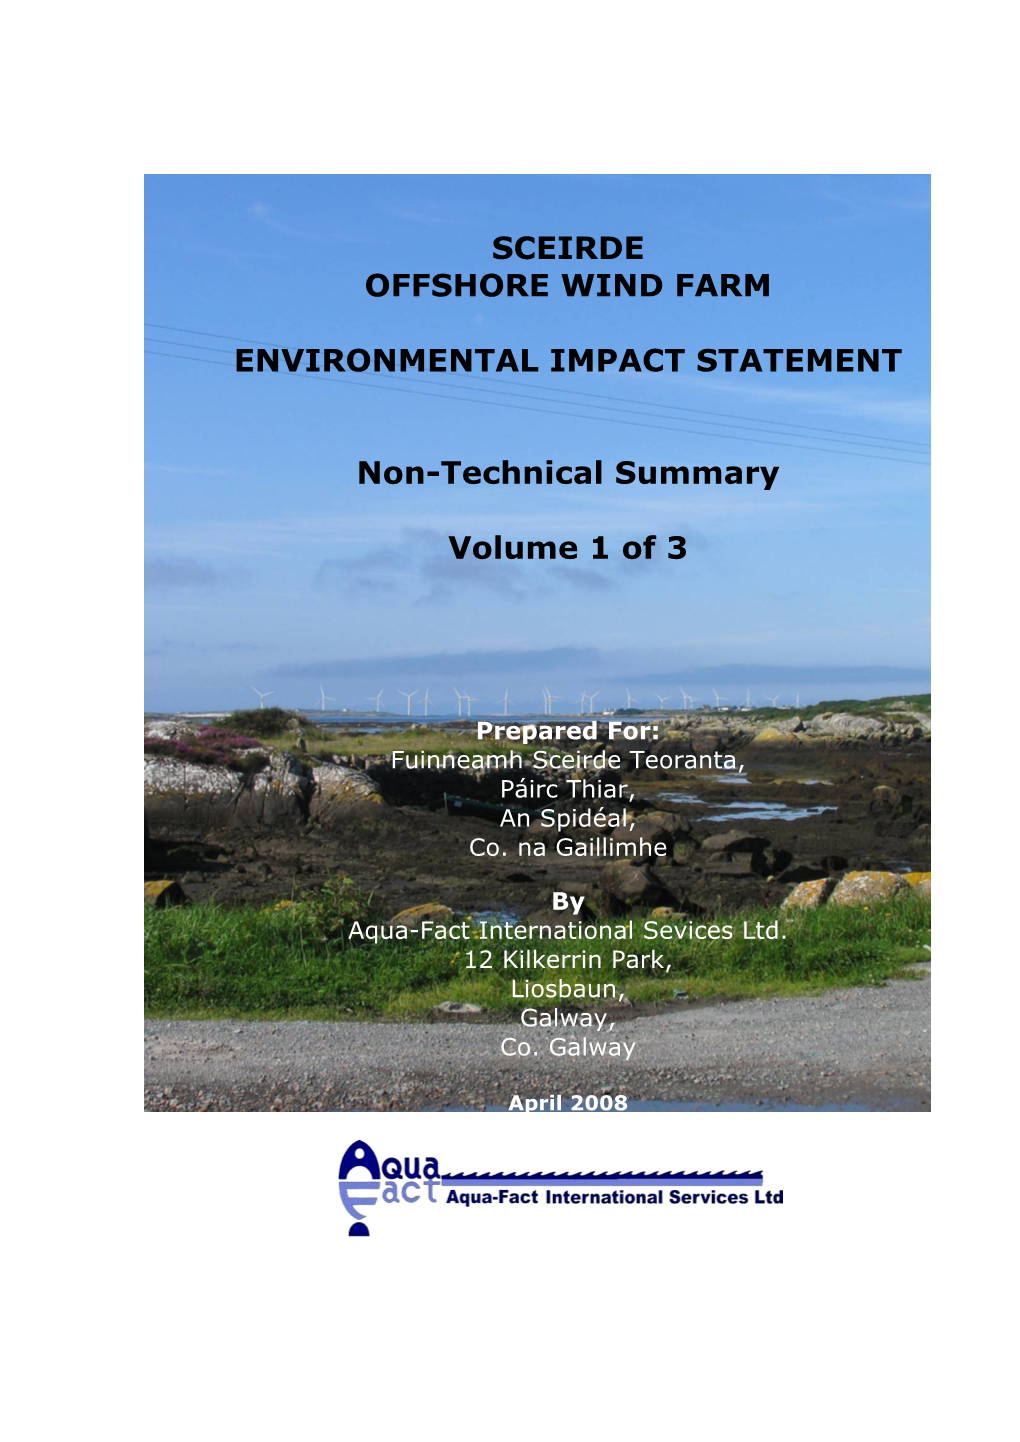 SCEIRDE OFFSHORE WIND FARM ENVIRONMENTAL IMPACT STATEMENT Non-Technical Summary Volume 1 of 3